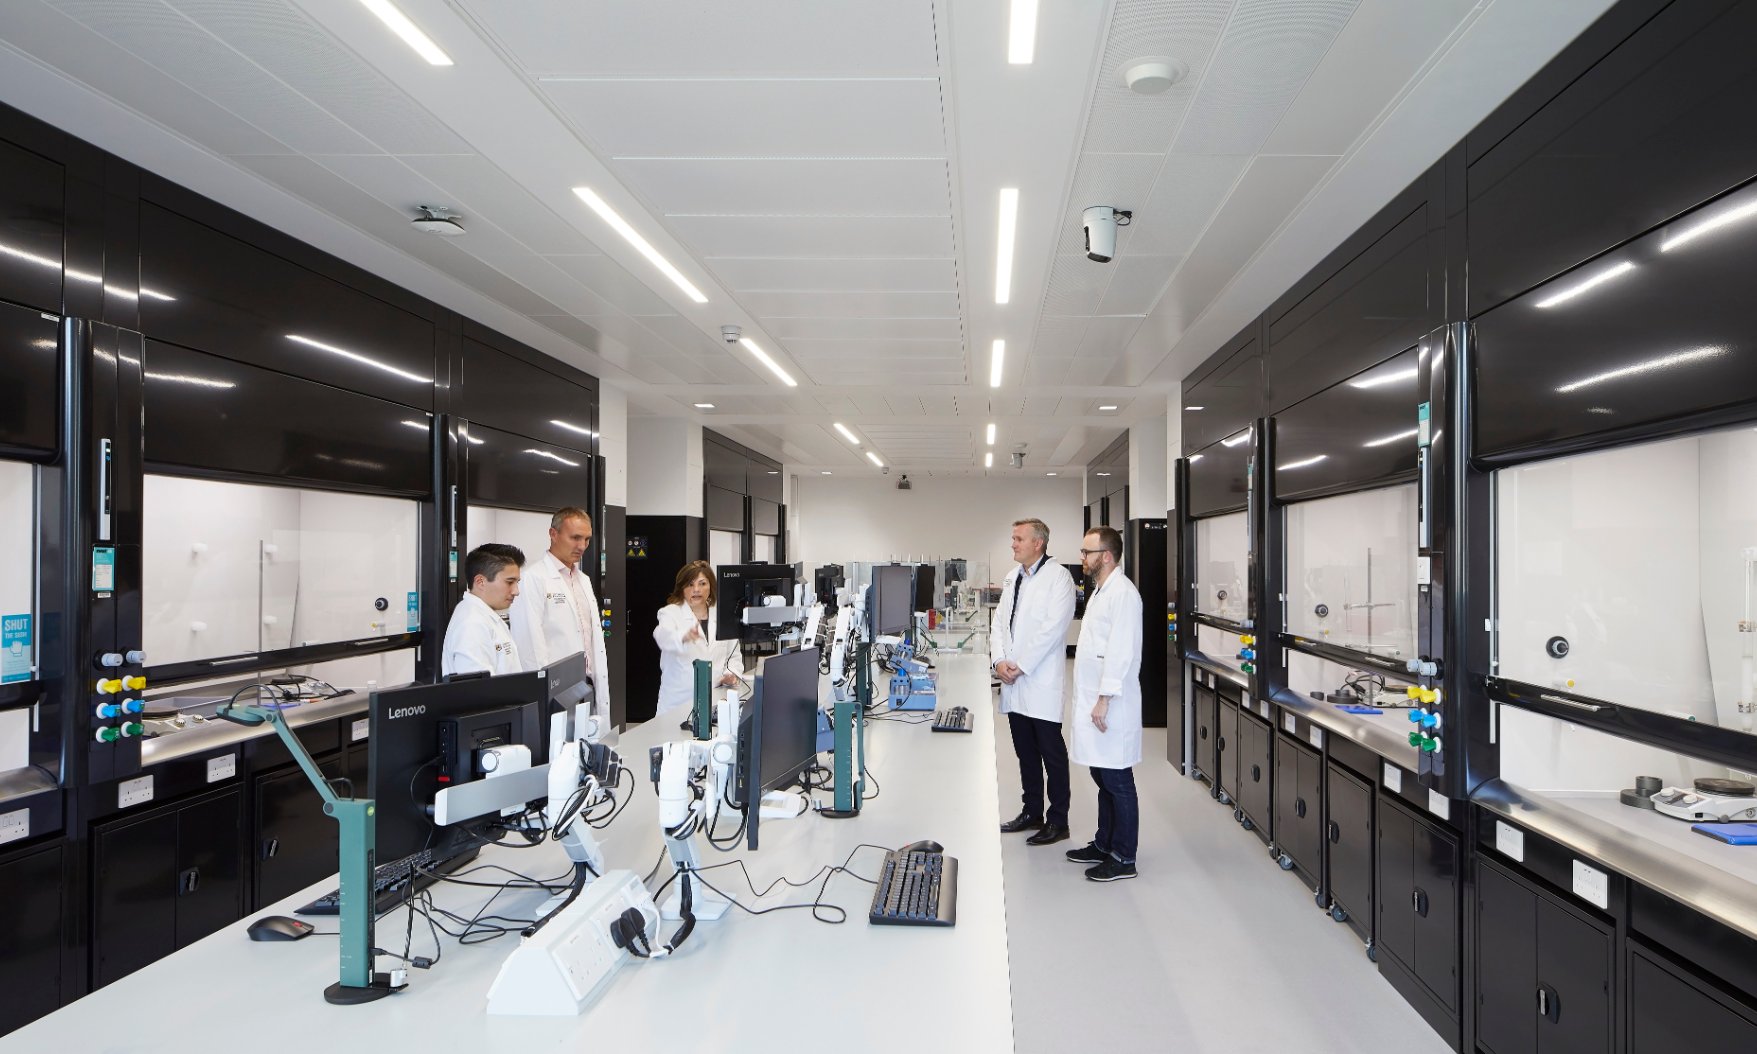 TROX air management systems best in class for University of Birmingham laboratory project